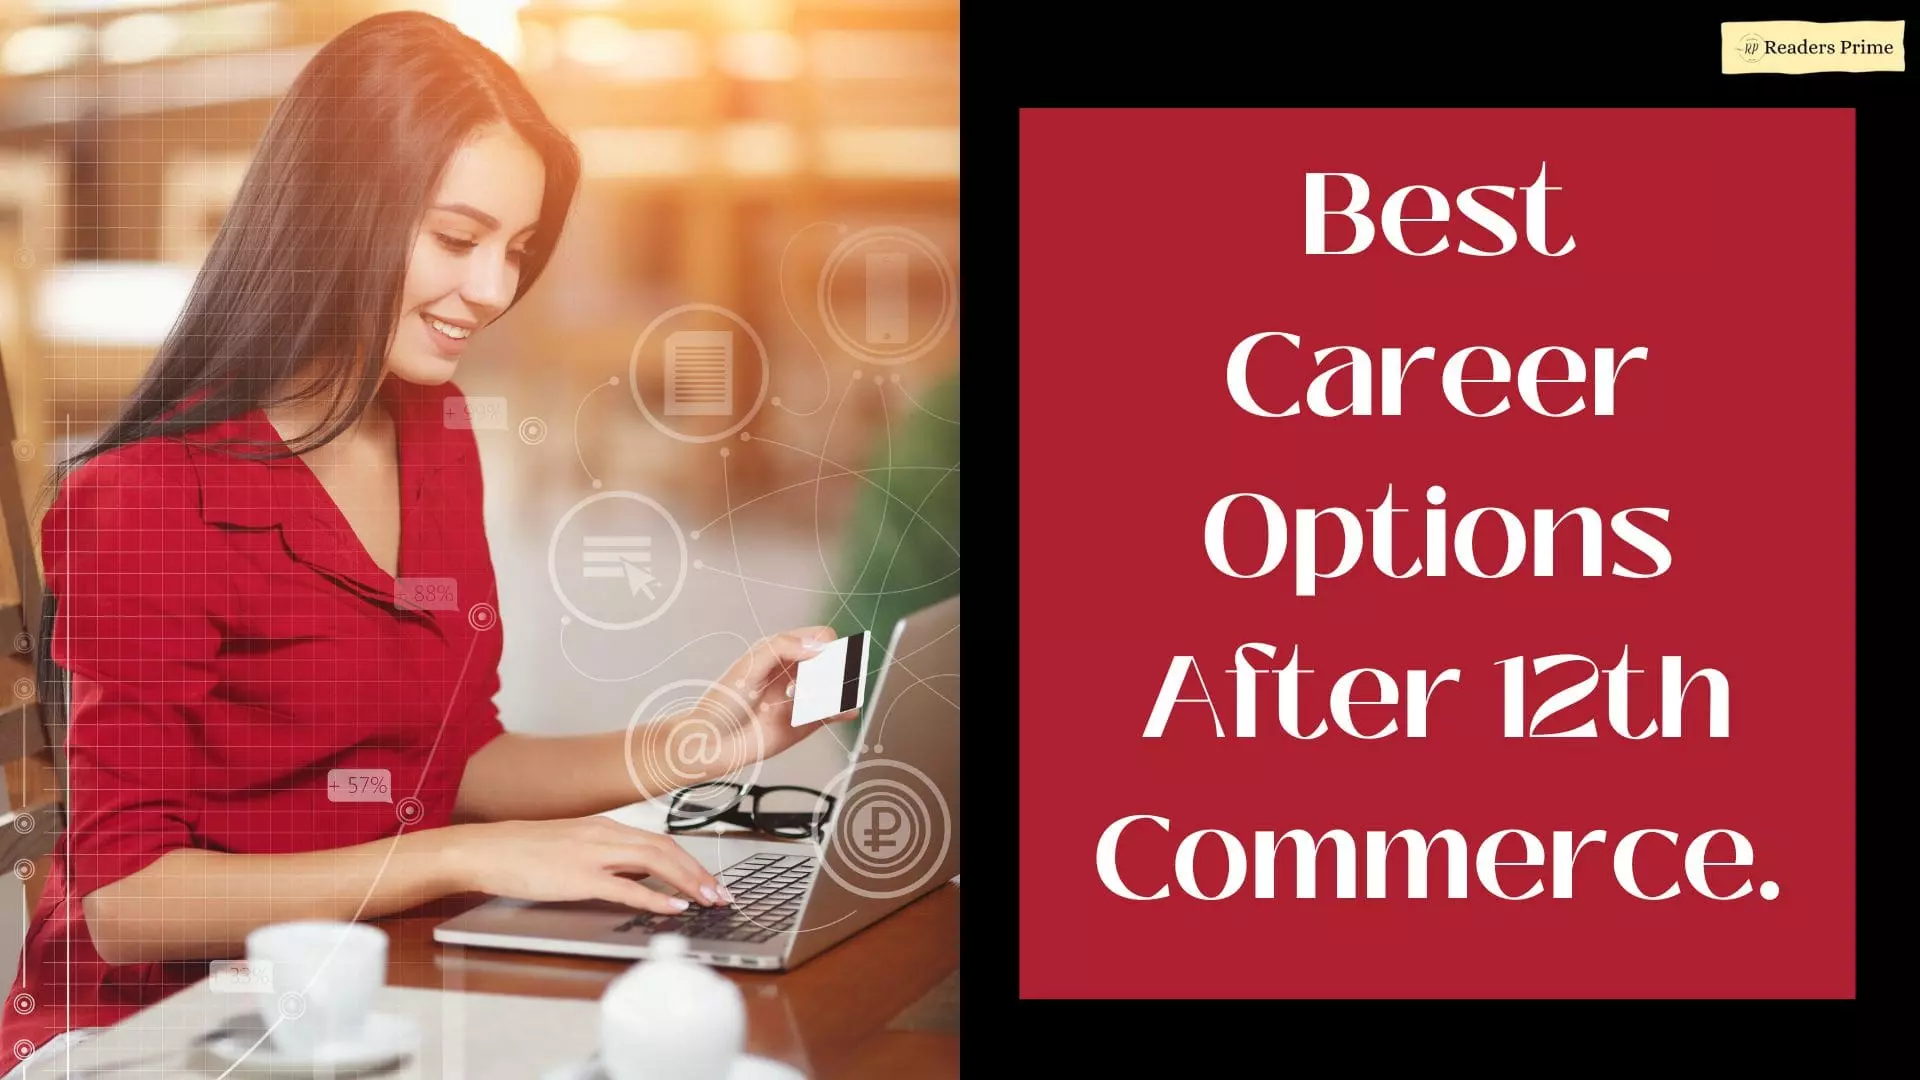 Best Career Options After 12th Commerce